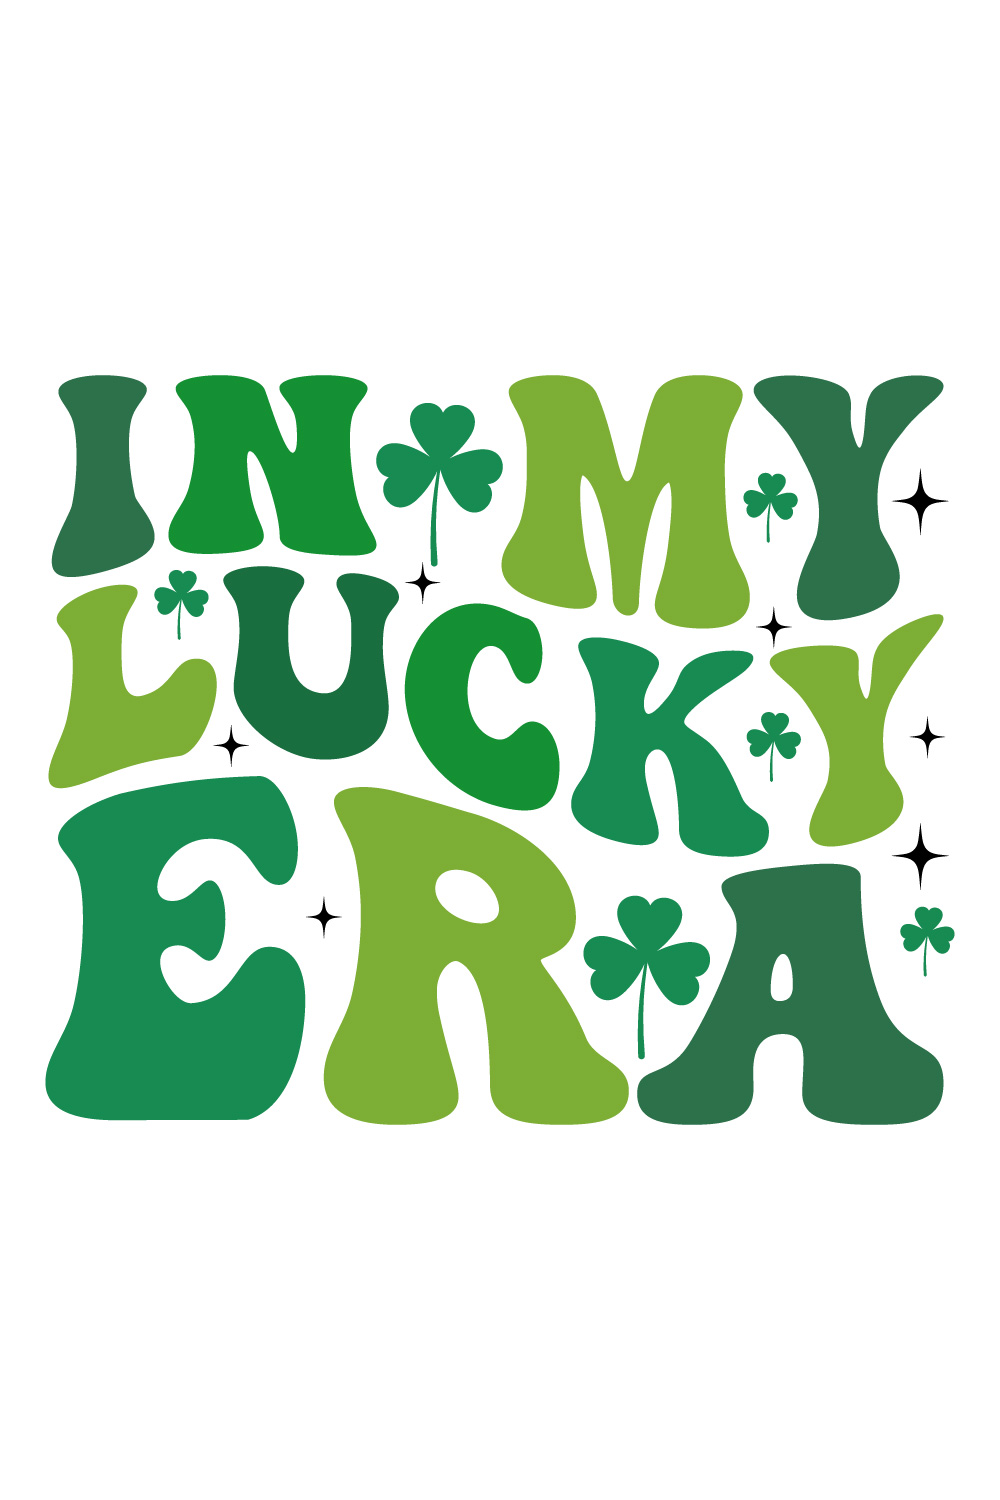 In My Lucky Era Retro,Svg,Era T shirt,Happy St Patrick Day Svg,Patricks Day Saying,Shamrock Svg,Clover Svg,Lucky,Pinches Svg,Irish Svg,Funny St Patrick's,Instant Download,T shirt,Svg Cut File,Cricut pinterest preview image.